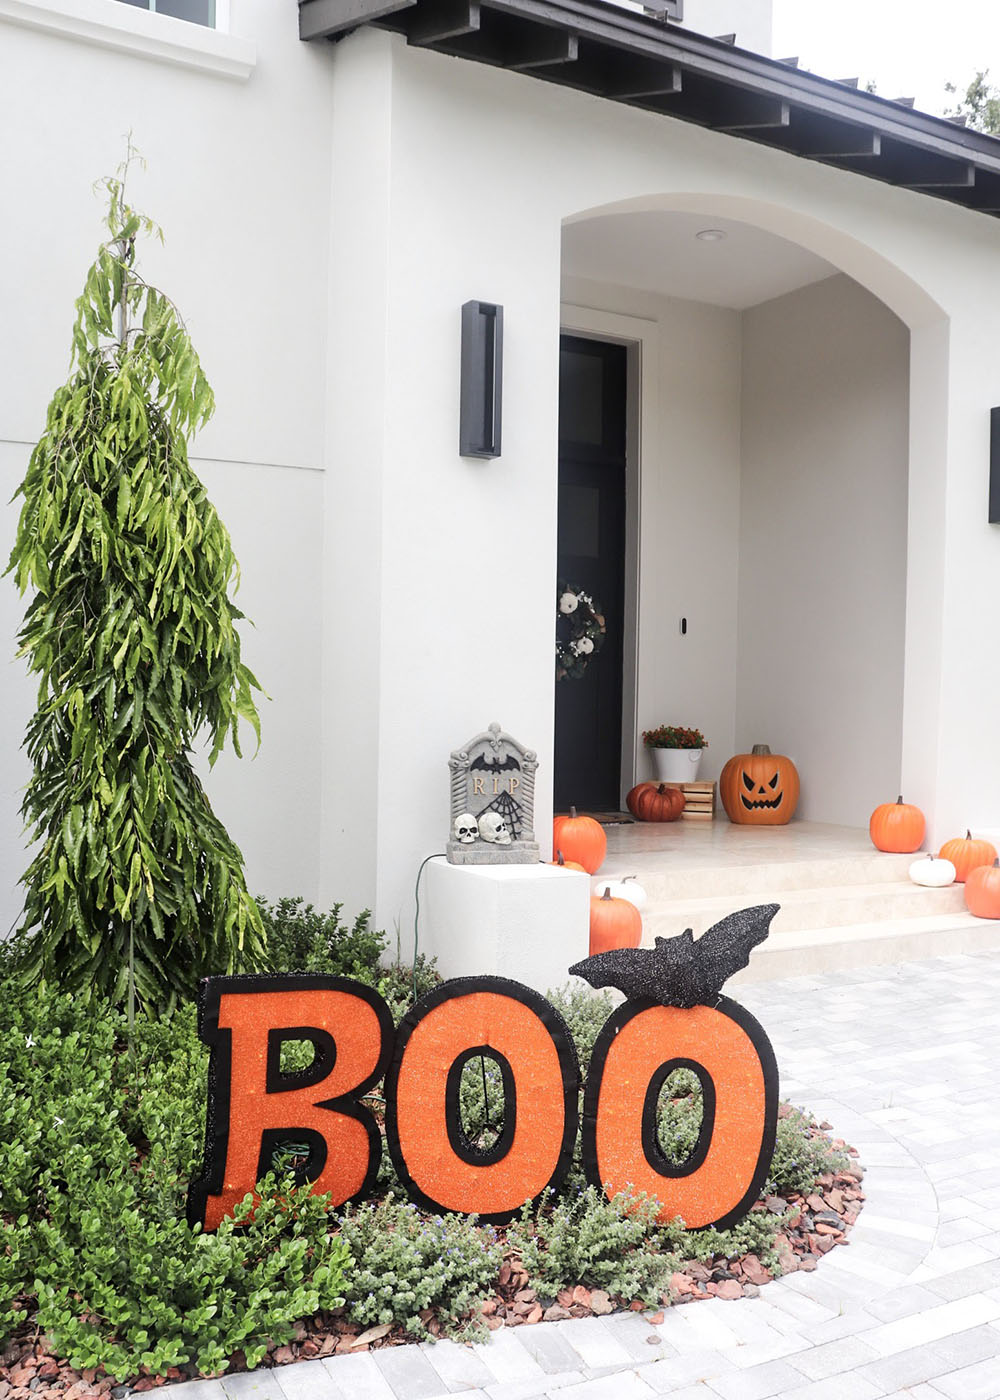 A pathway leading to a front door with a large orange and black Boo sign with a bat on top.